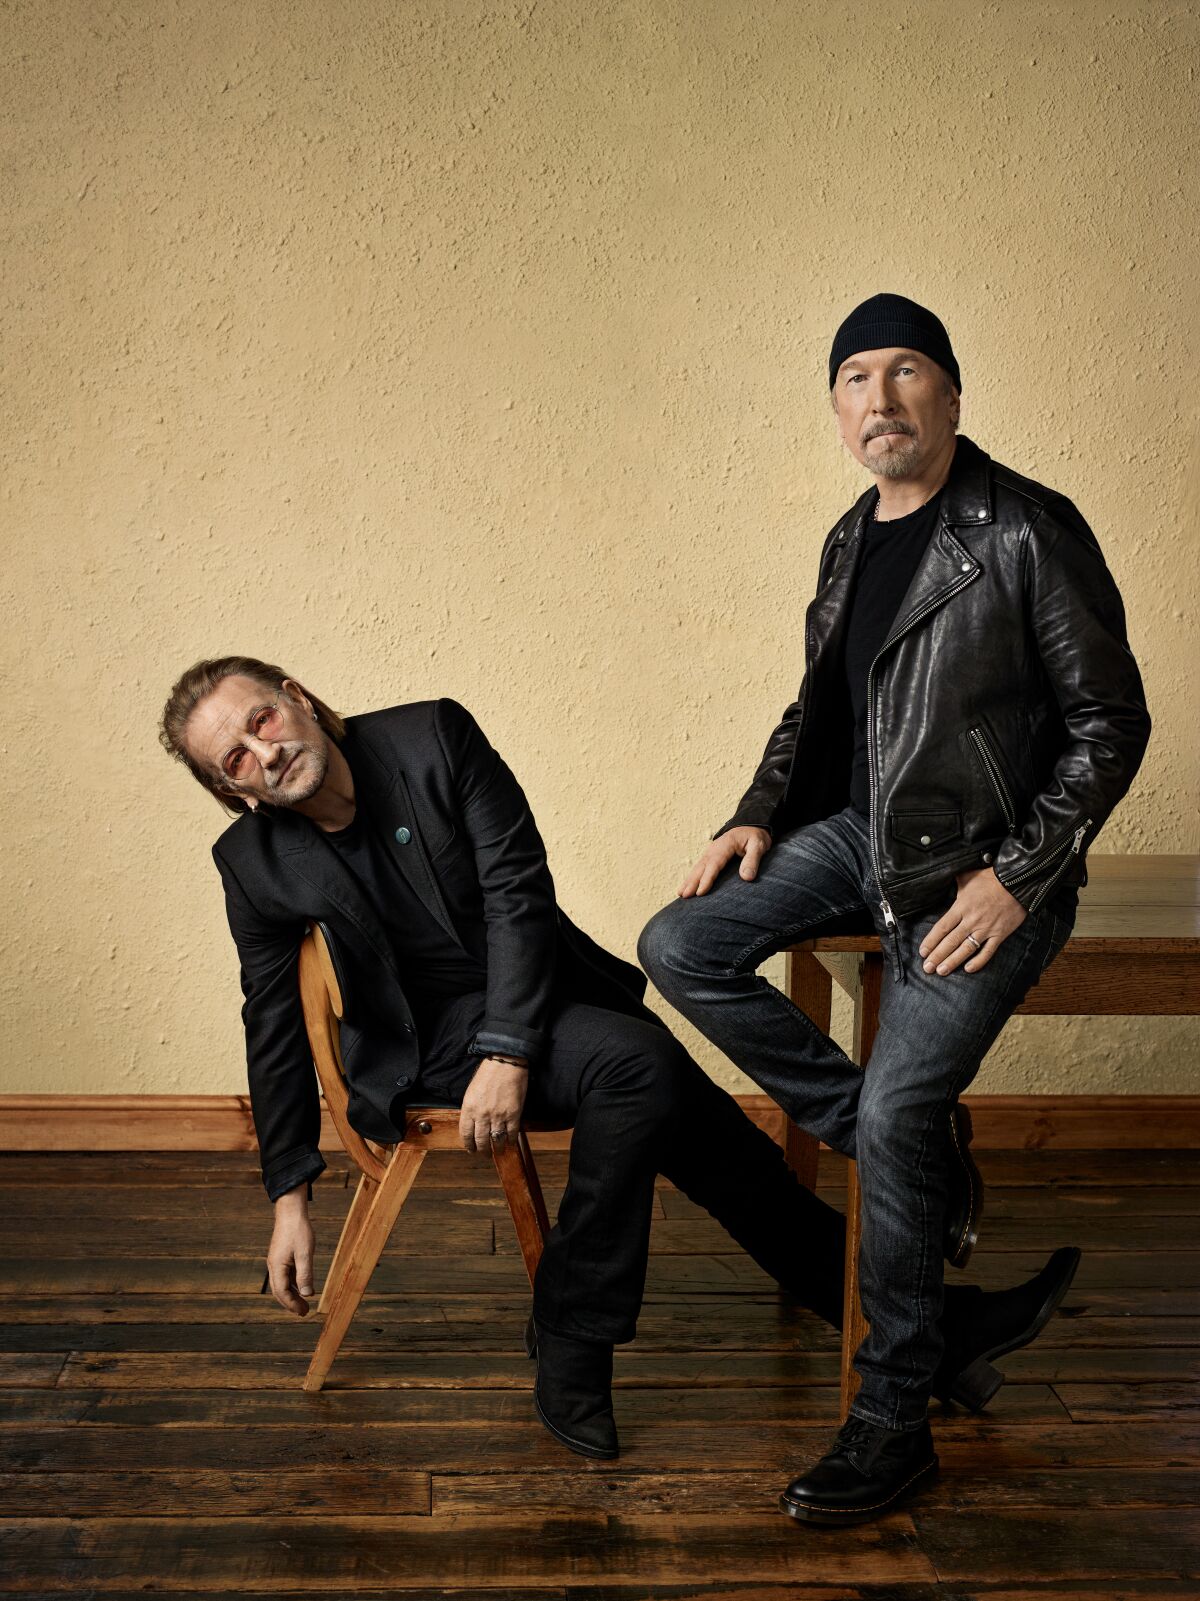 Bono in a black suit and the Edge in black leather jacket and beanie